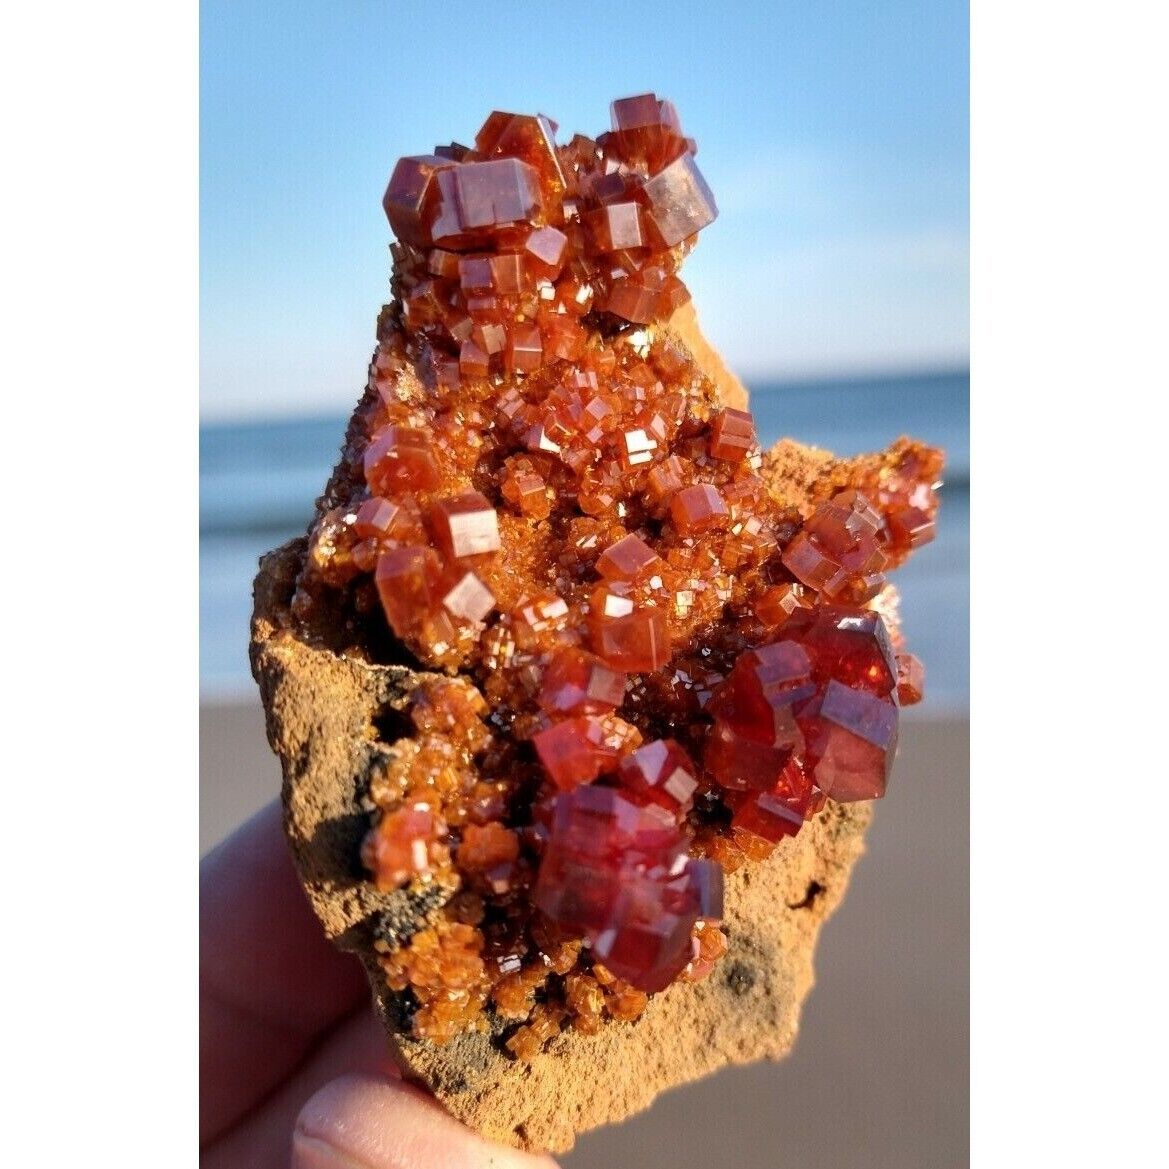 Red Lustrous Vanadinite Crystals On Matrix From Morocco